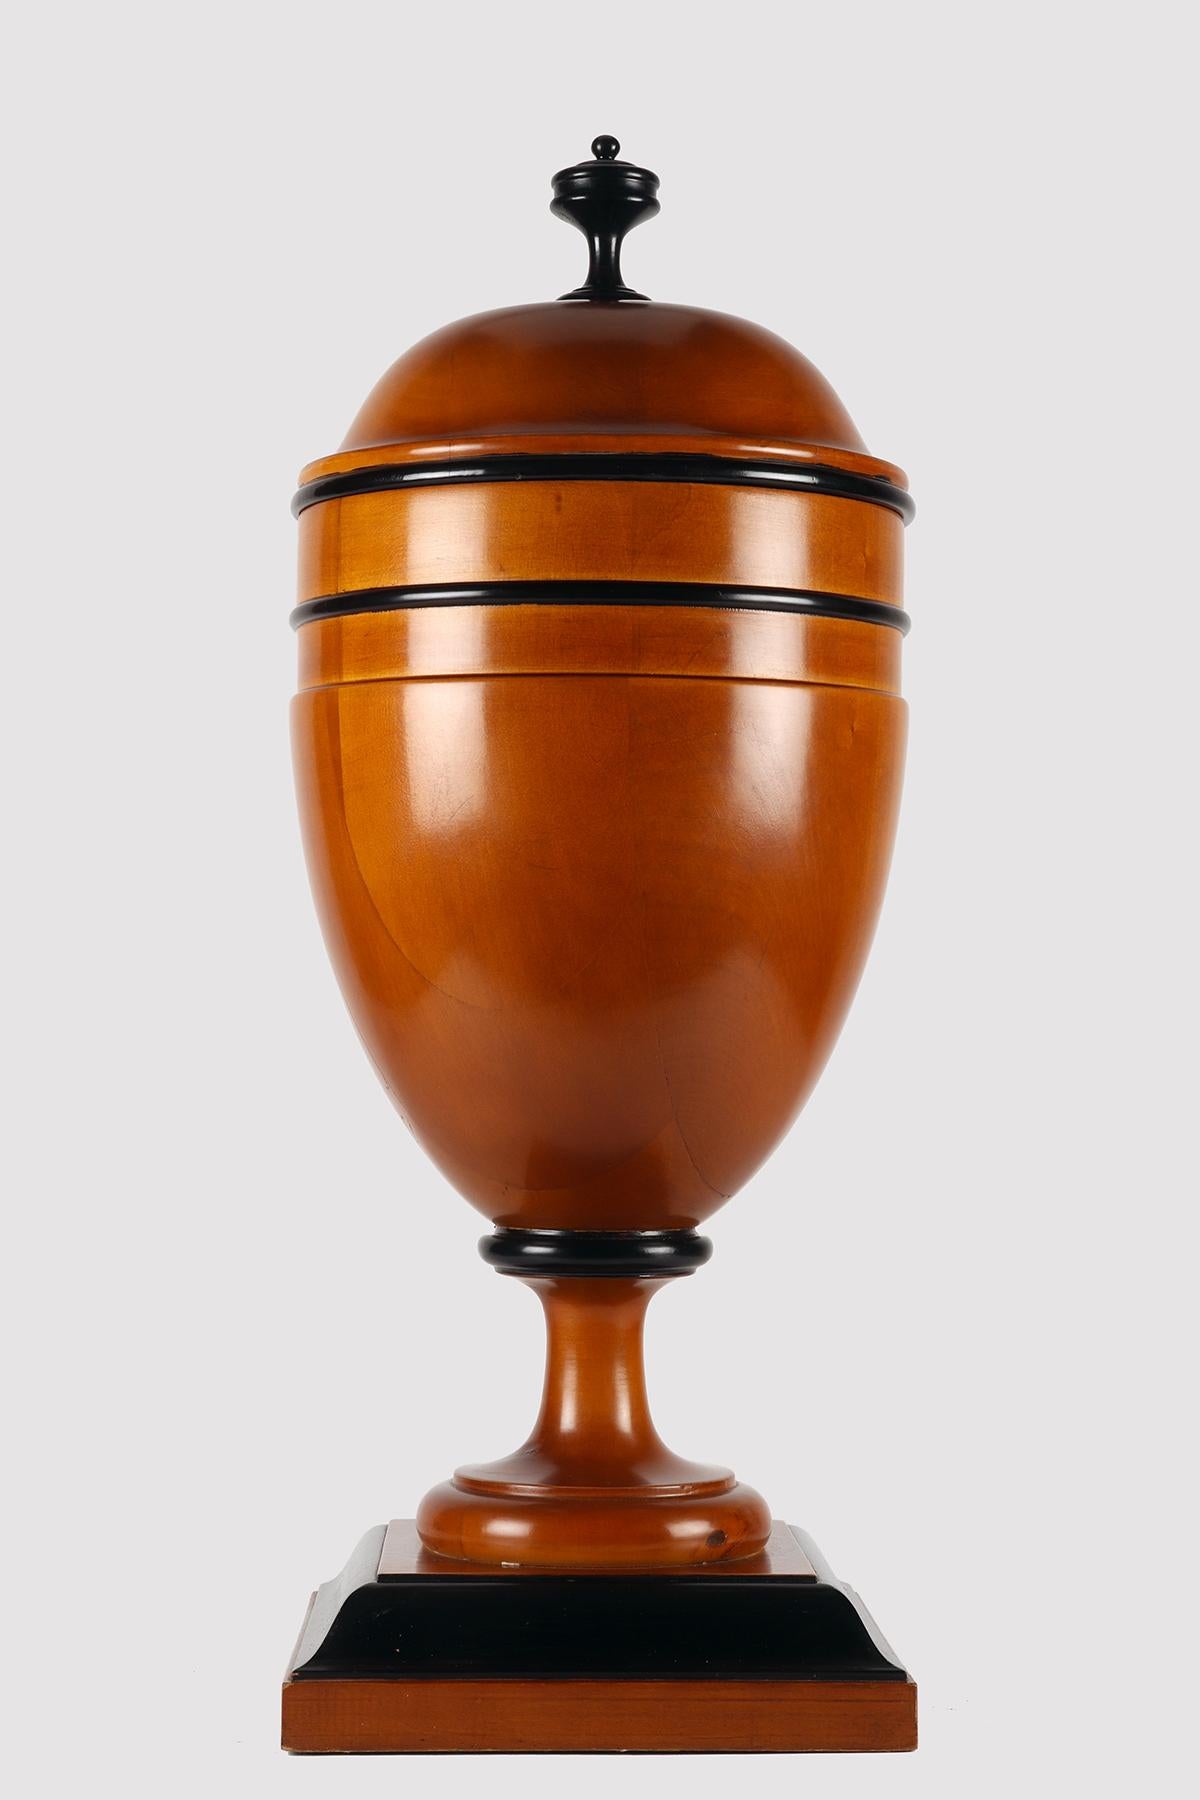 A large apothecary-herbalist jar with lid in the purest Biedermeier style. Made of maple wood, the surface is finished with shellac and beeswax, with black lacquered edges and knob. Coming from the herbalist-apothecary of a pharmacy. Austria around